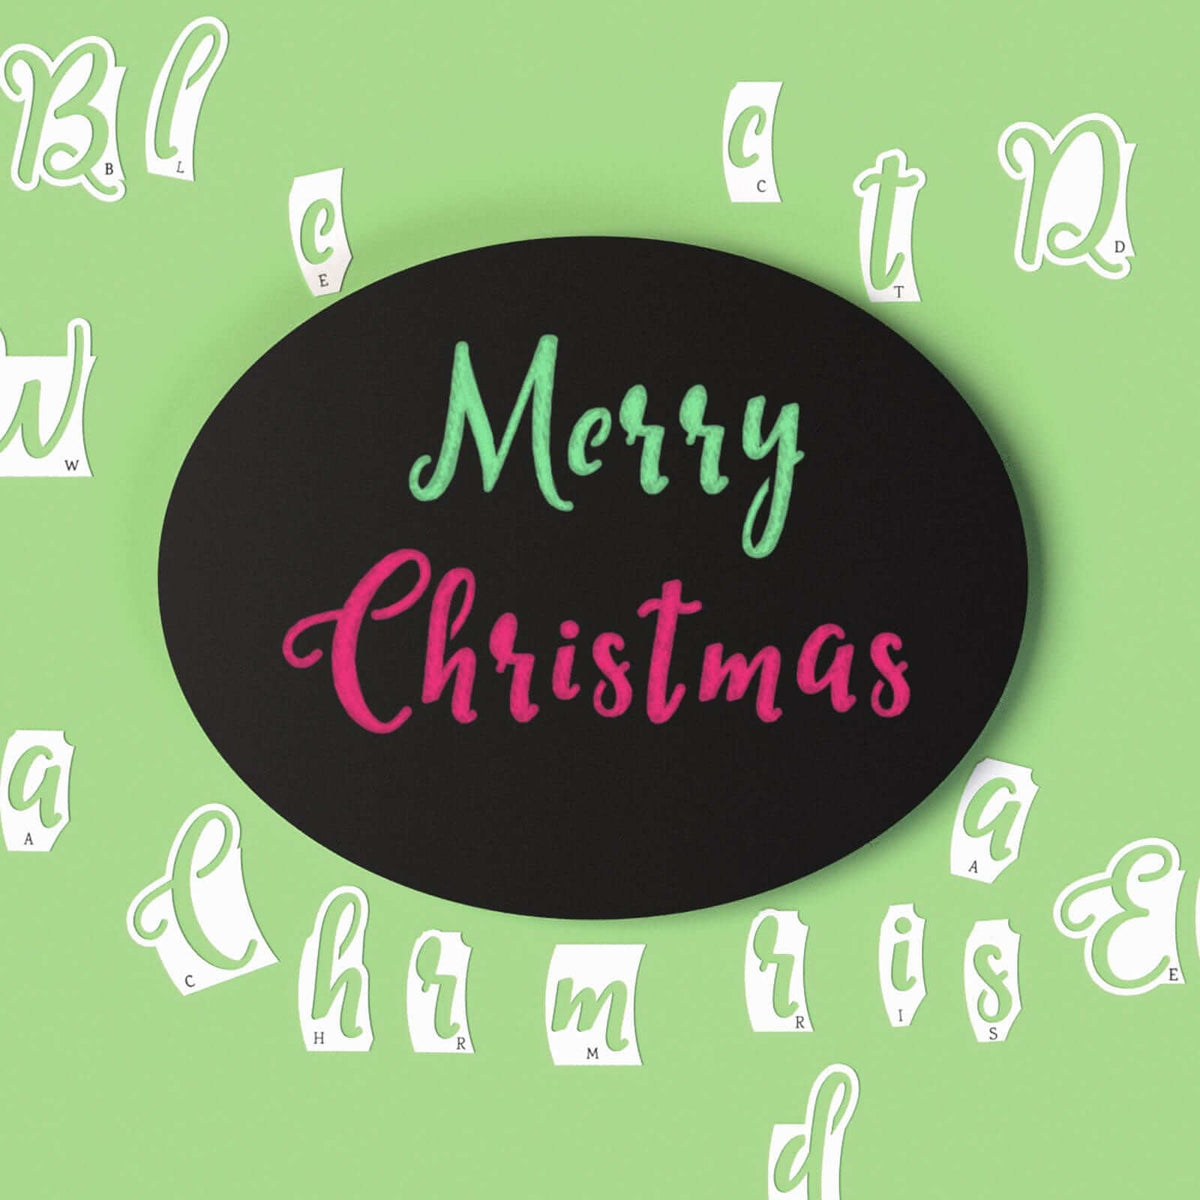 Merry Christmas chalkboard sign, an easy Christmas craft made with magnetic calligraphy letter stencils for easy DIY chalkboard